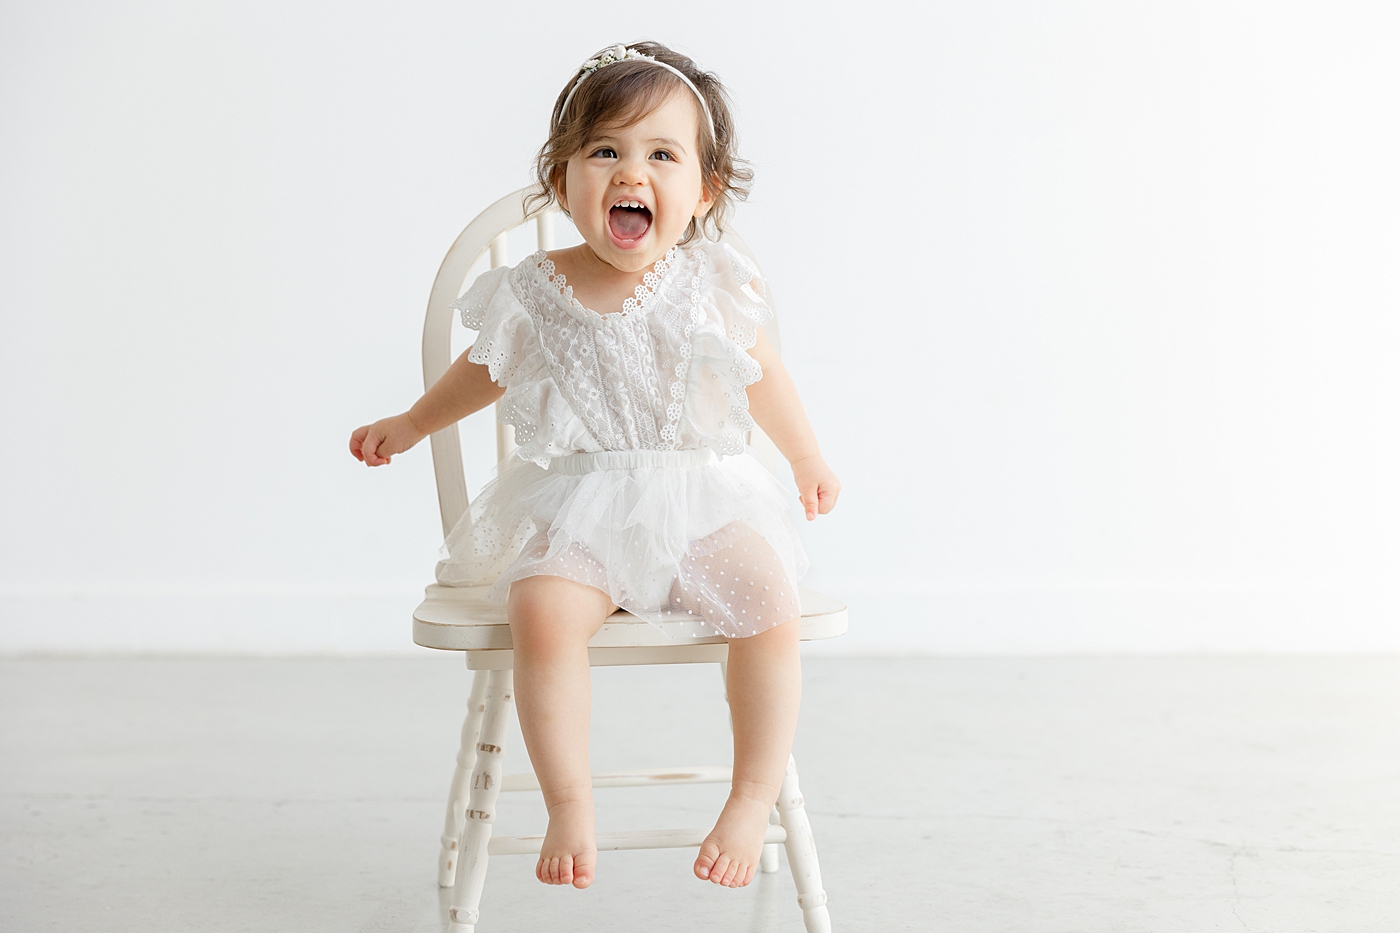 Toddler baby girl sitting in a white chair | Image by Sana Ahmed Photography